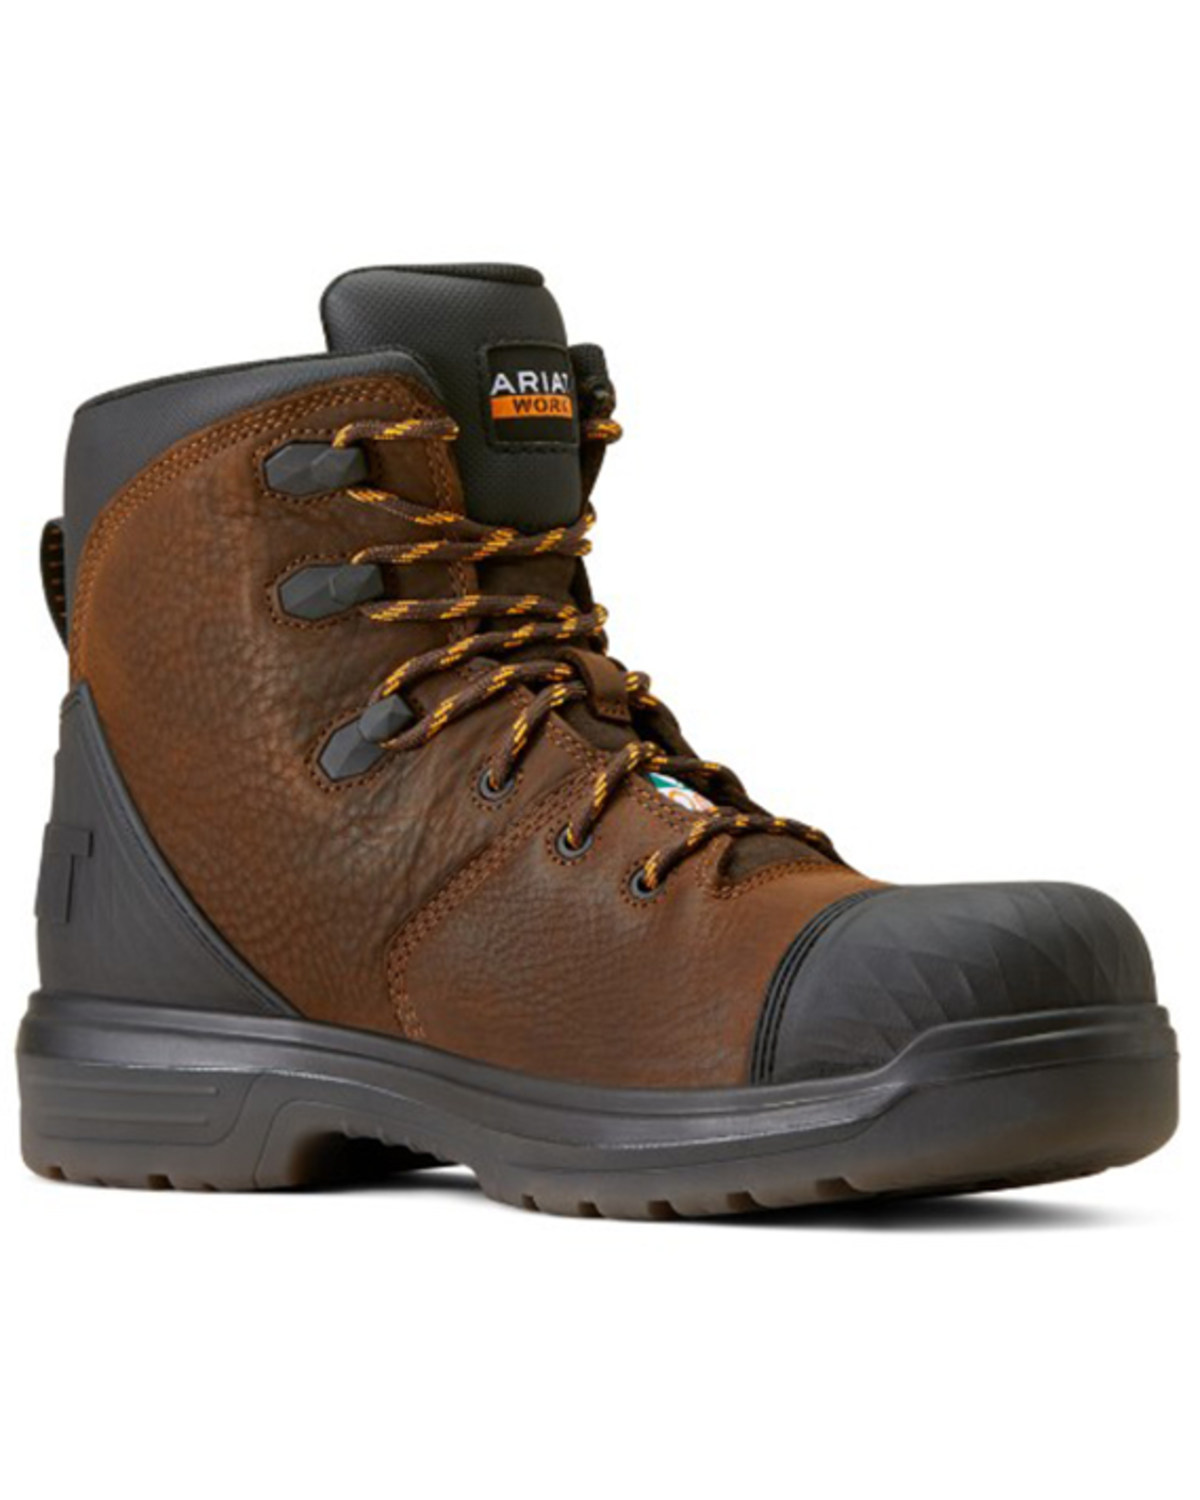 Ariat Men's Turbo Outlaw 6" CSA Waterproof Work Boots - Composite Toe